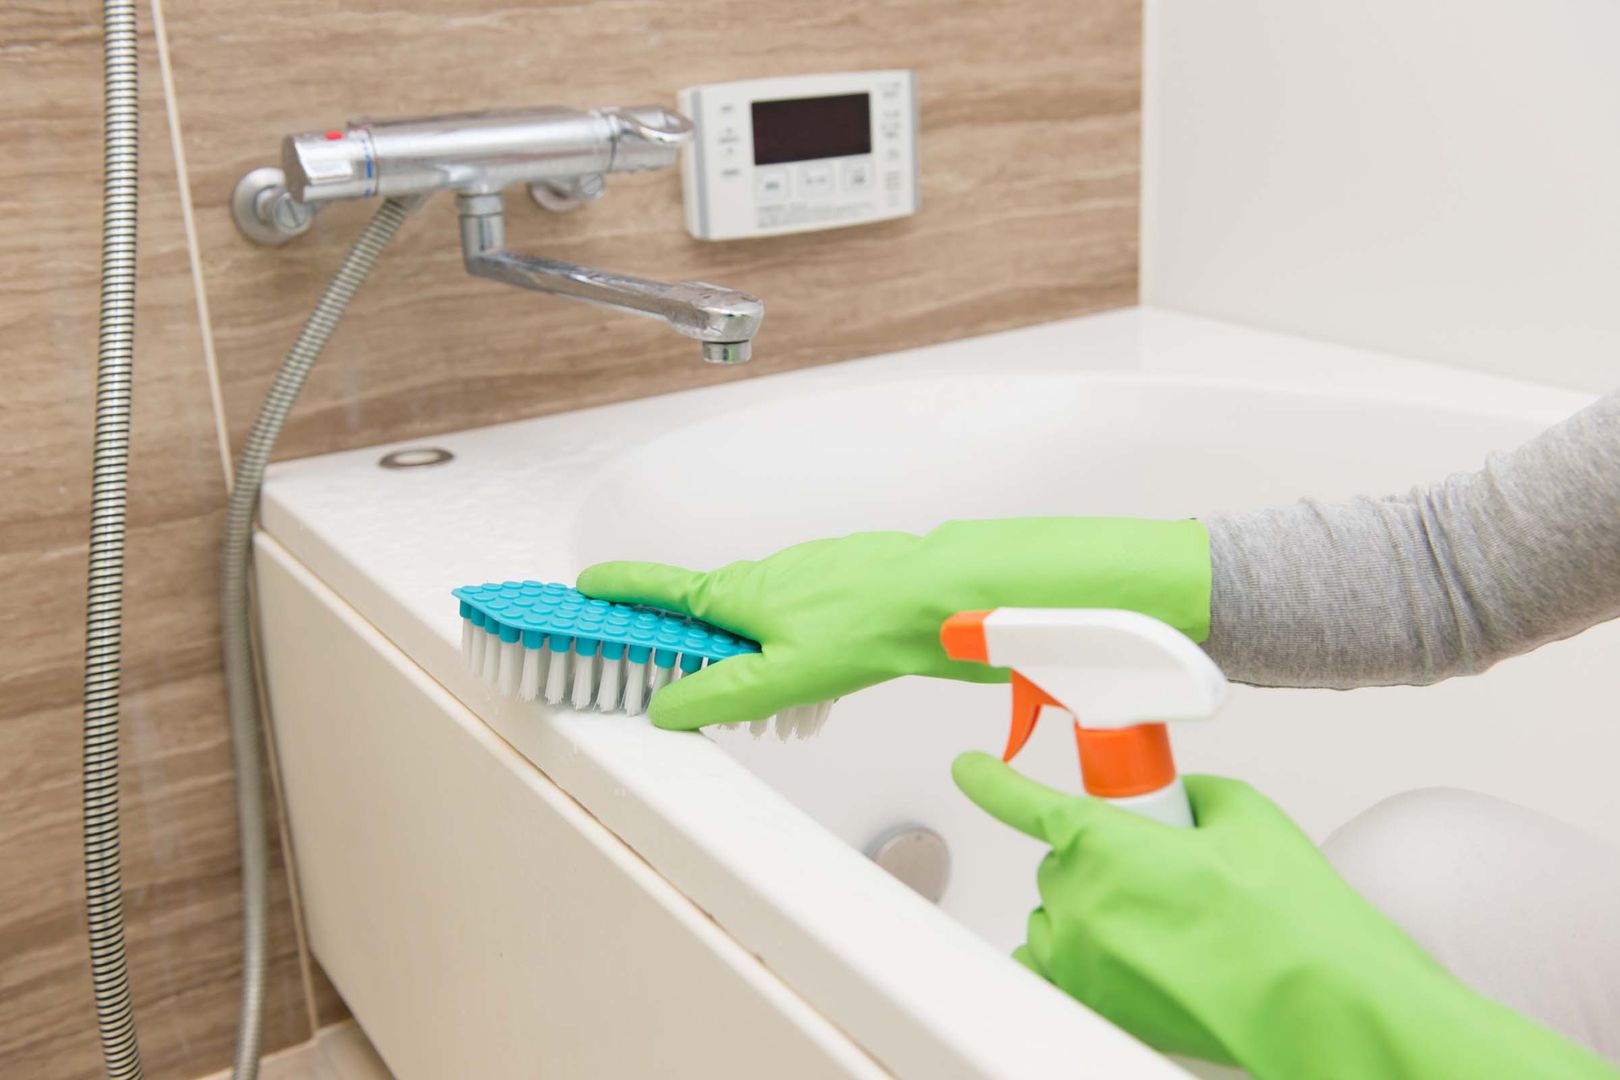 Residential Bathroom Cleaning Cleaning Services Johannesburg